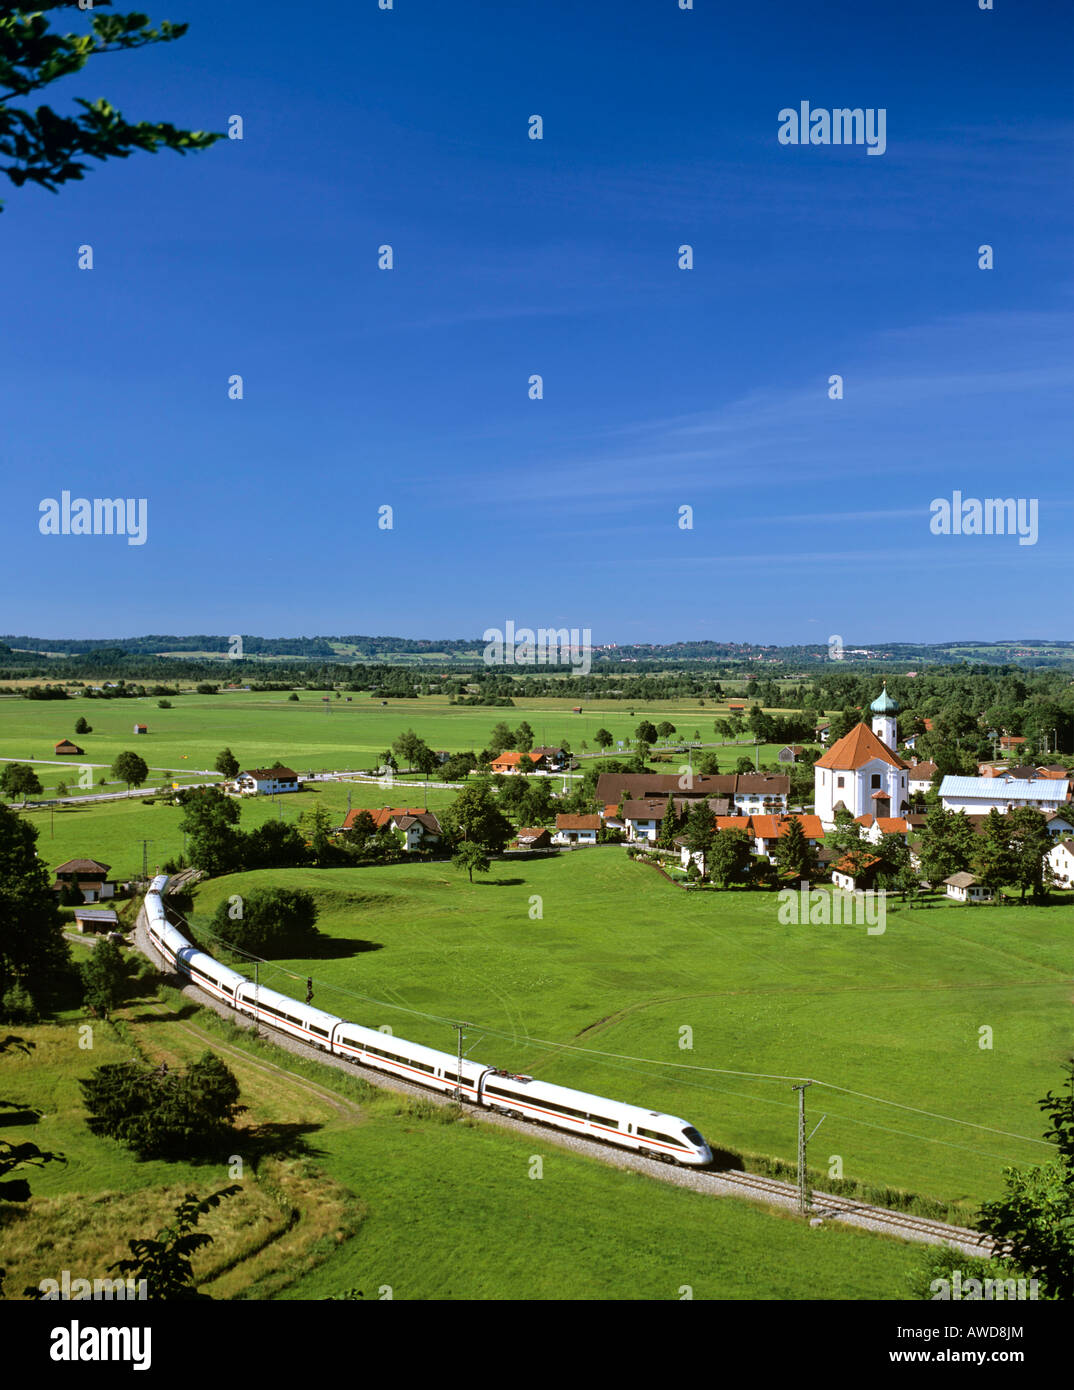 Panoramic view of Eschenlohe featuring the ICE Inter City Express high-speed train, Loisach Valley, Upper Bavaria, Germany, Eur Stock Photo